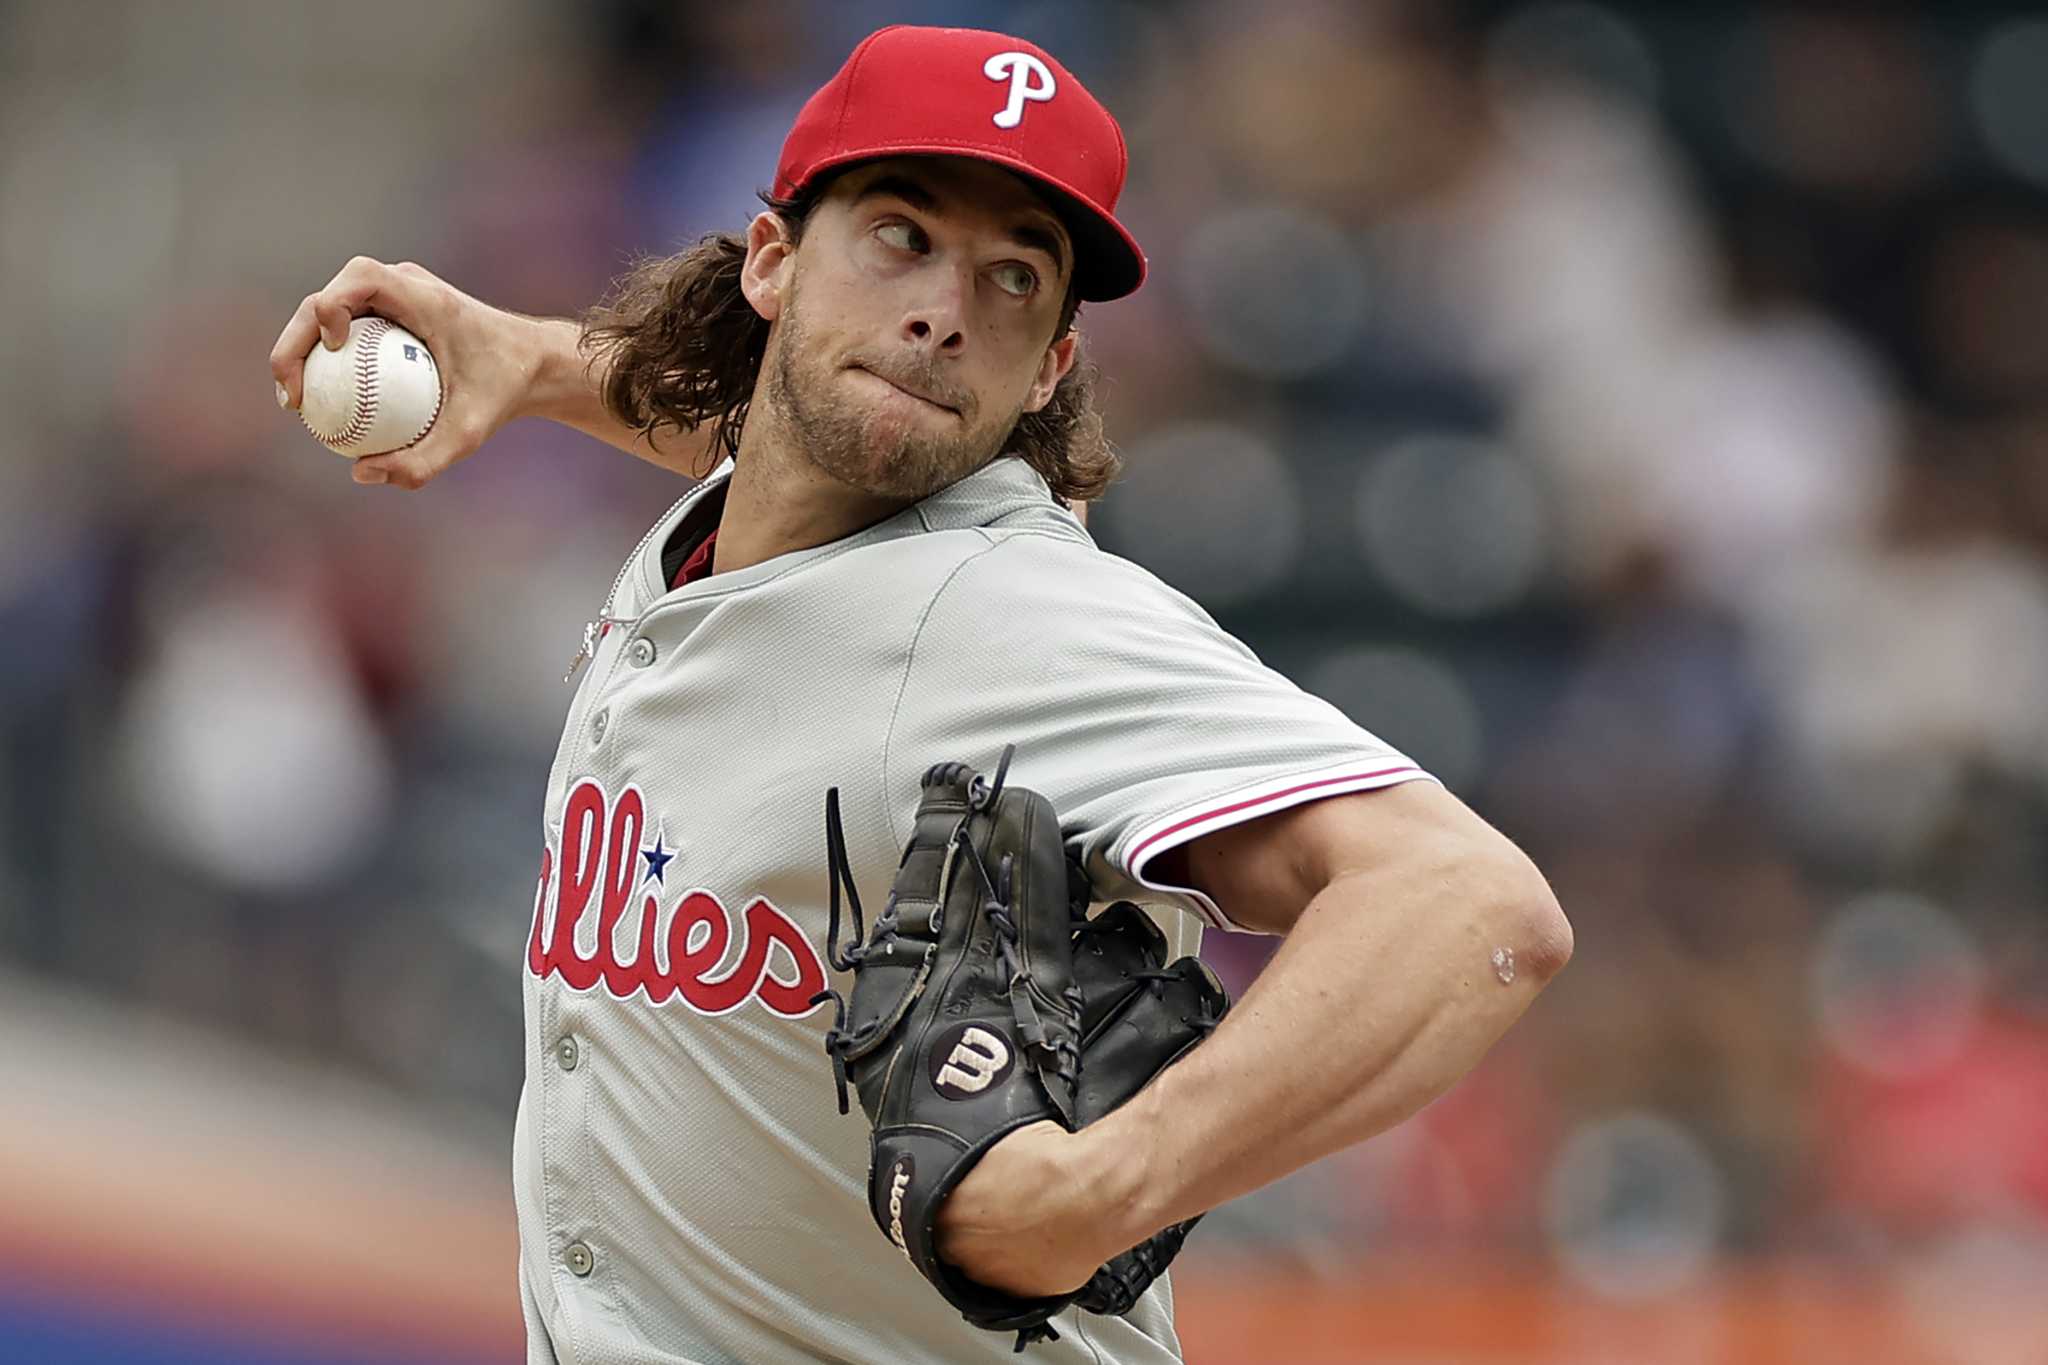 Nola fires 4-hitter in 4th career shutout as MLB-best Phillies blank Mets 4-0 for 2-game sweep